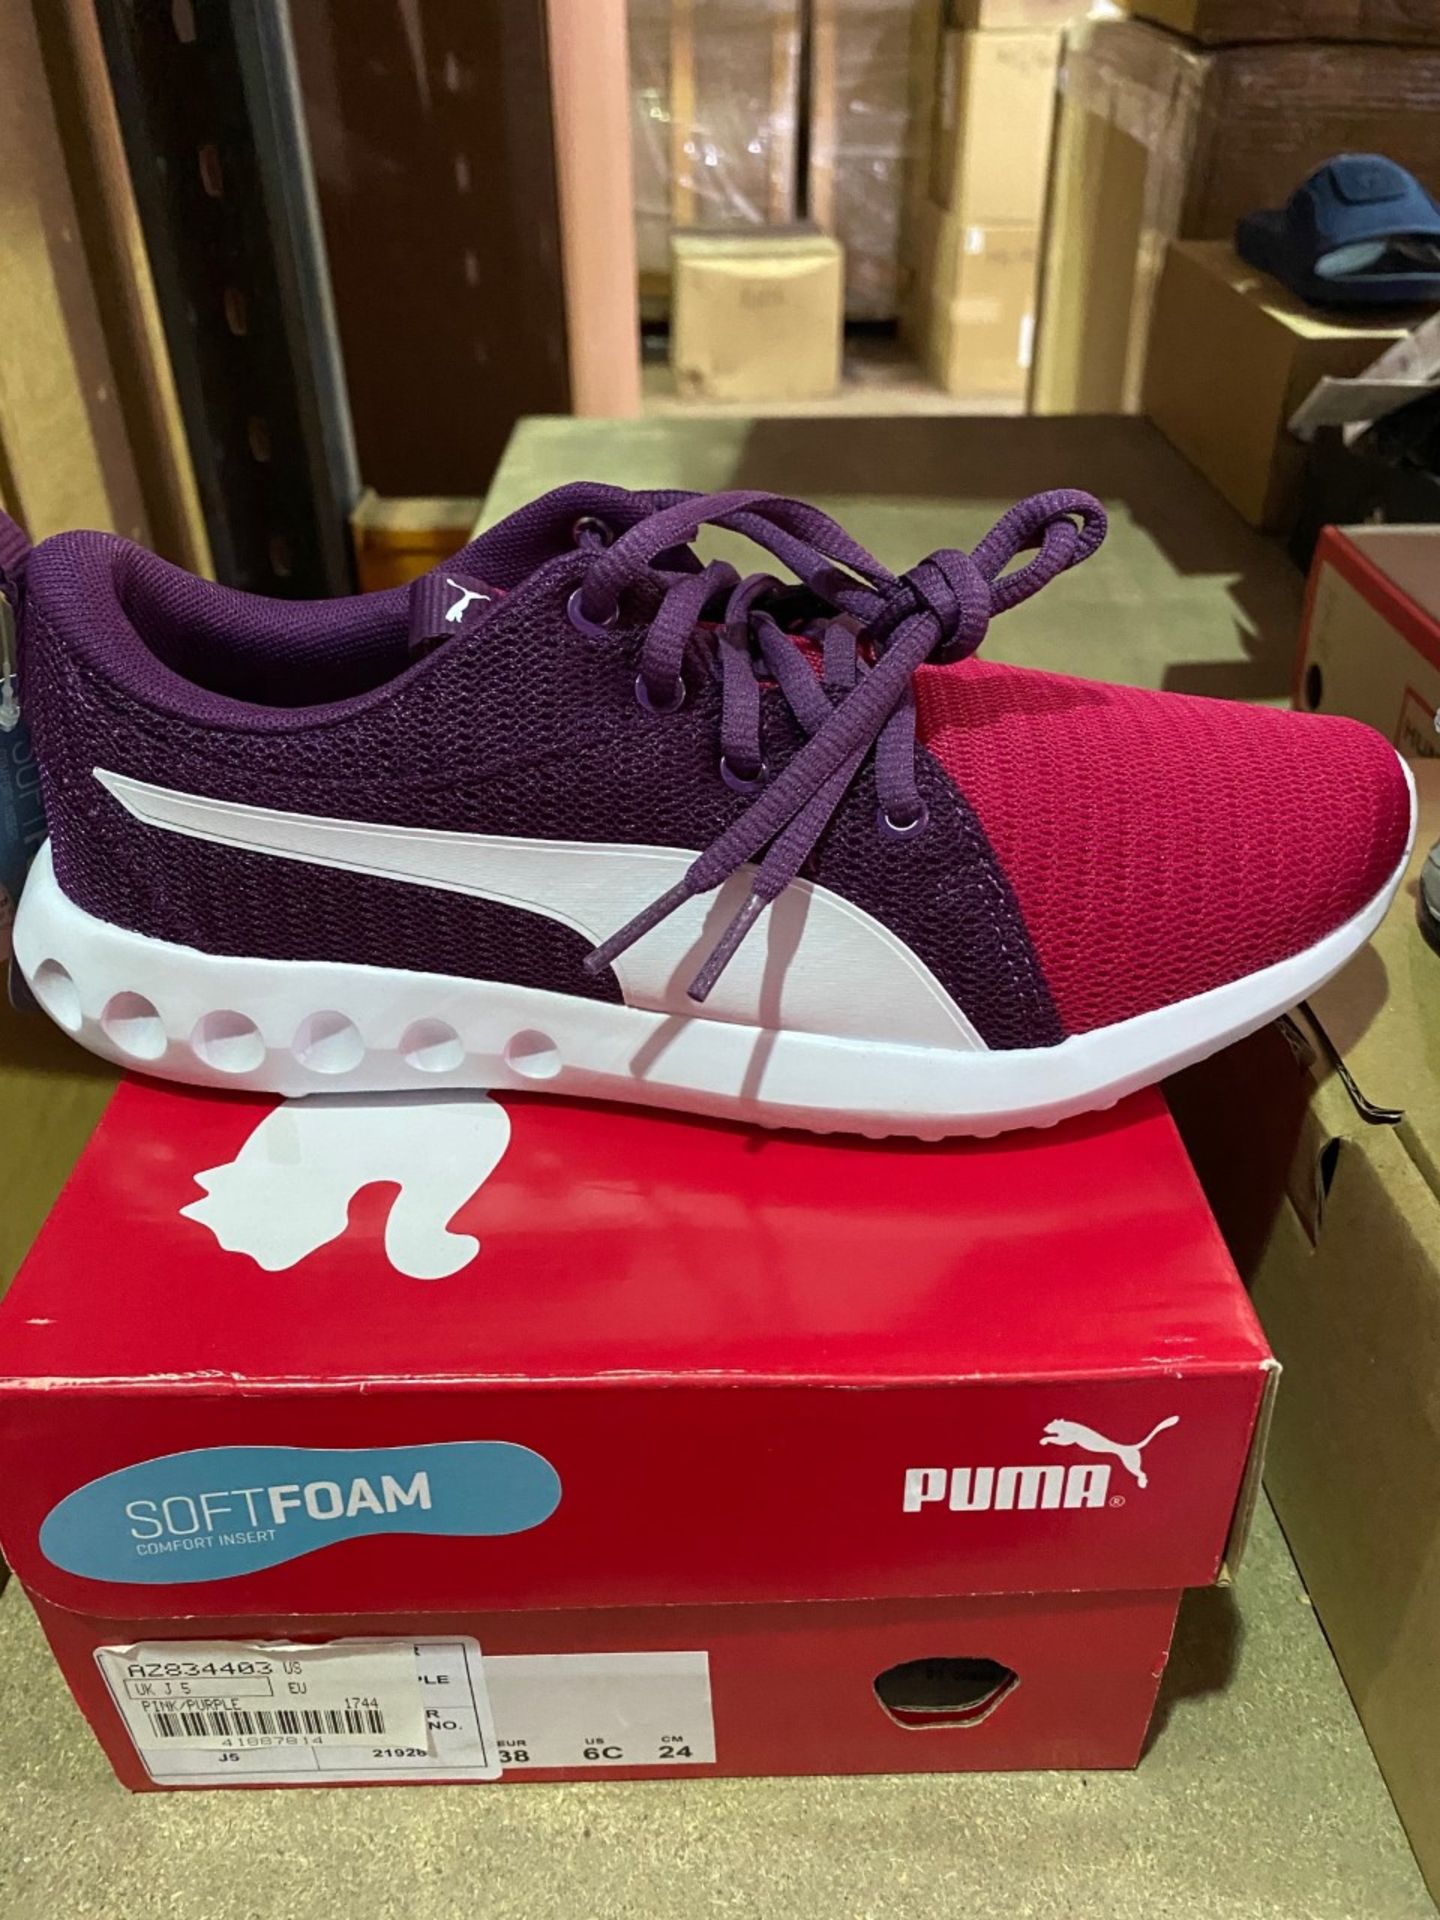 NEW & BOXED PUMA PINK/PURPLE TRAINERS SIZE JUNIOR 5